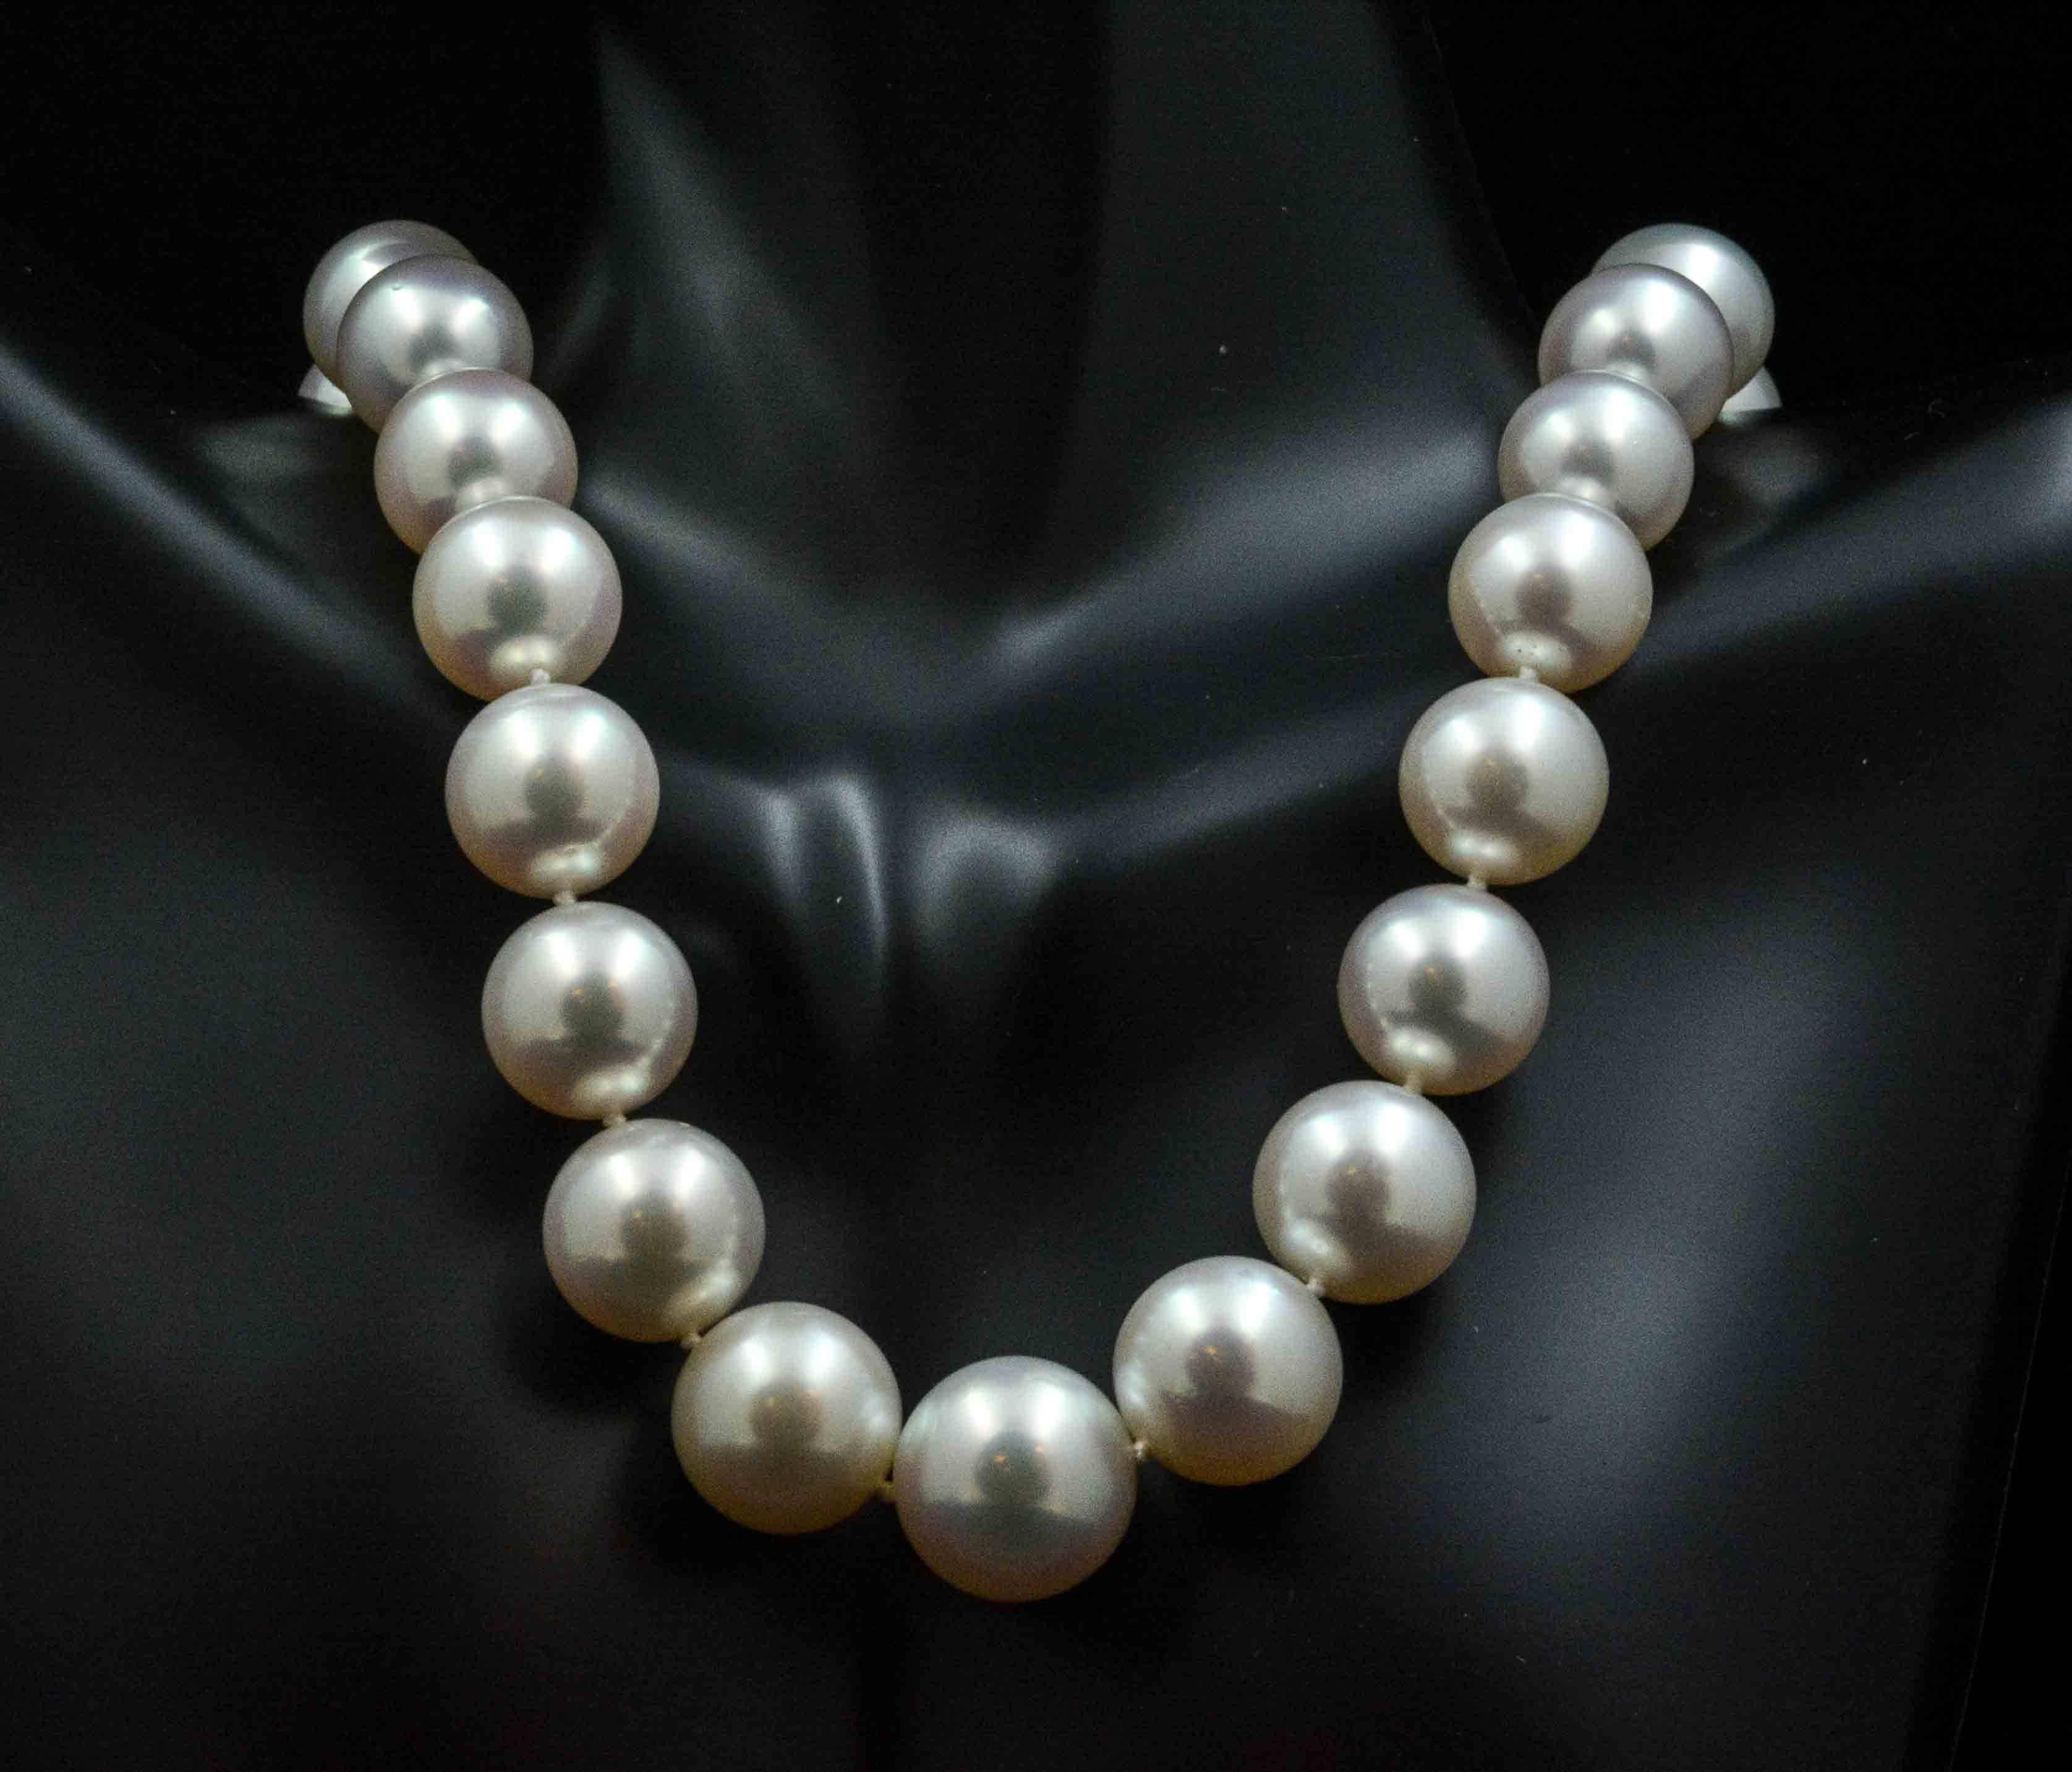 Much larger than the average pearl, the smoothness and roundness of these pearls are exceptional. These are the most rare and extraordinary pearls you'll find in jewelry. The pearls measure 11 to 15.5 mm in a 17.5 inch strand. This South Sea Pearls